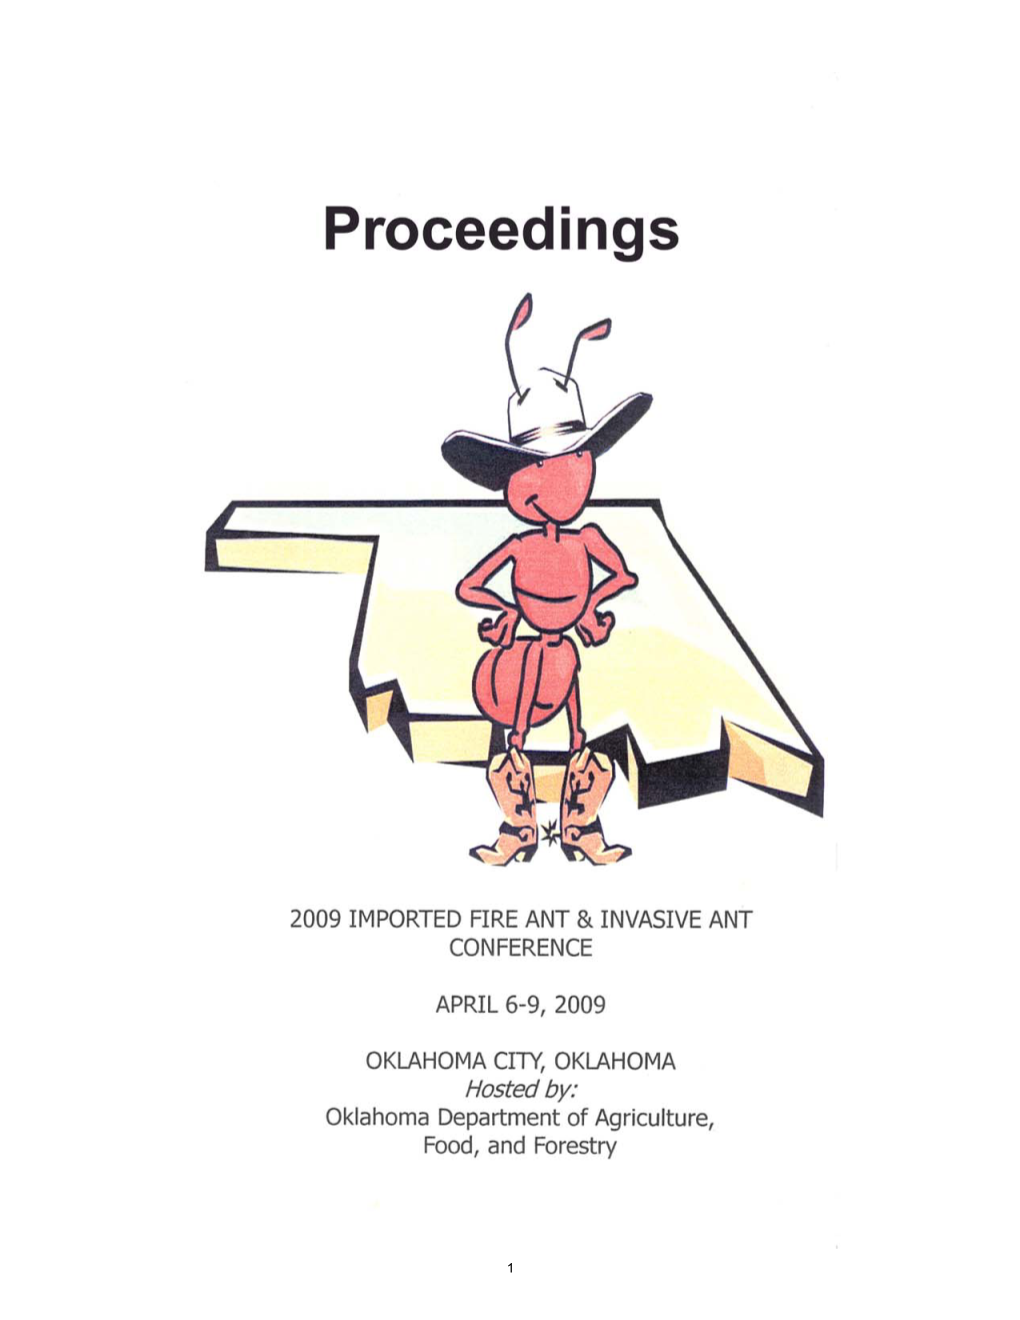 2009 Imported Fire Ant Conference Proceedings